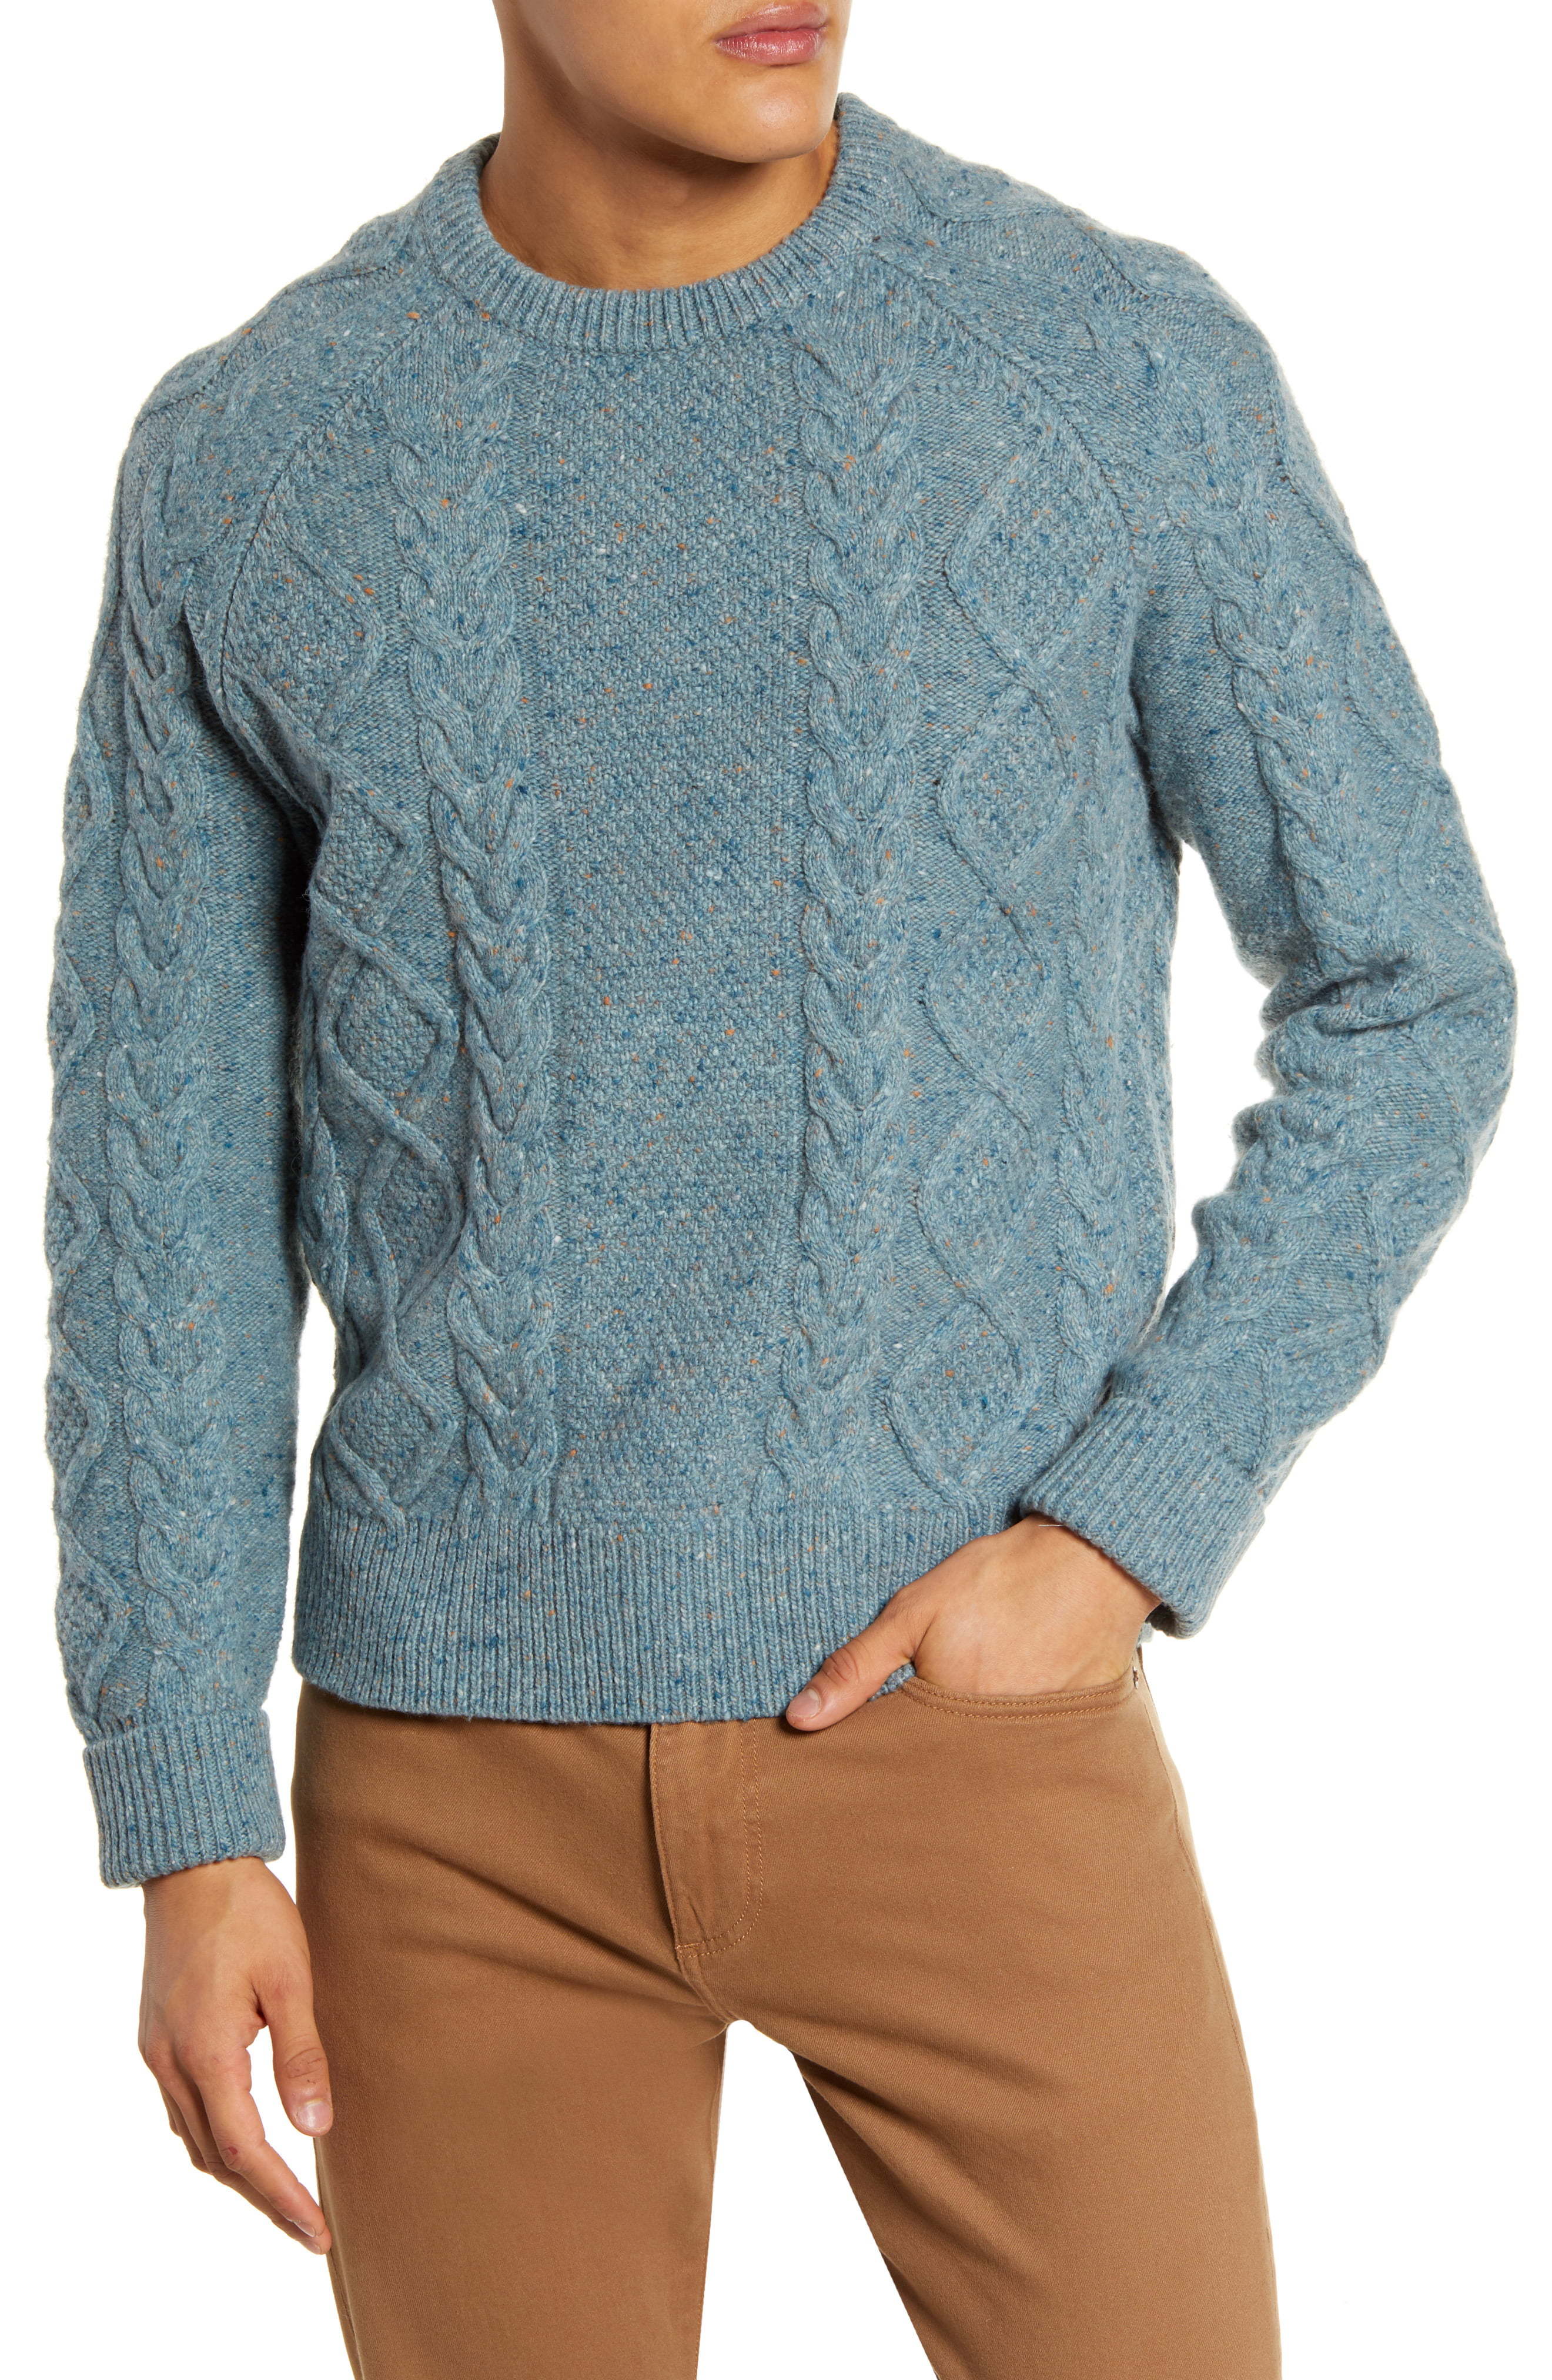 Madewell Donegal Cable Knit Fisherman Sweater, $49 | Nordstrom | Lookastic